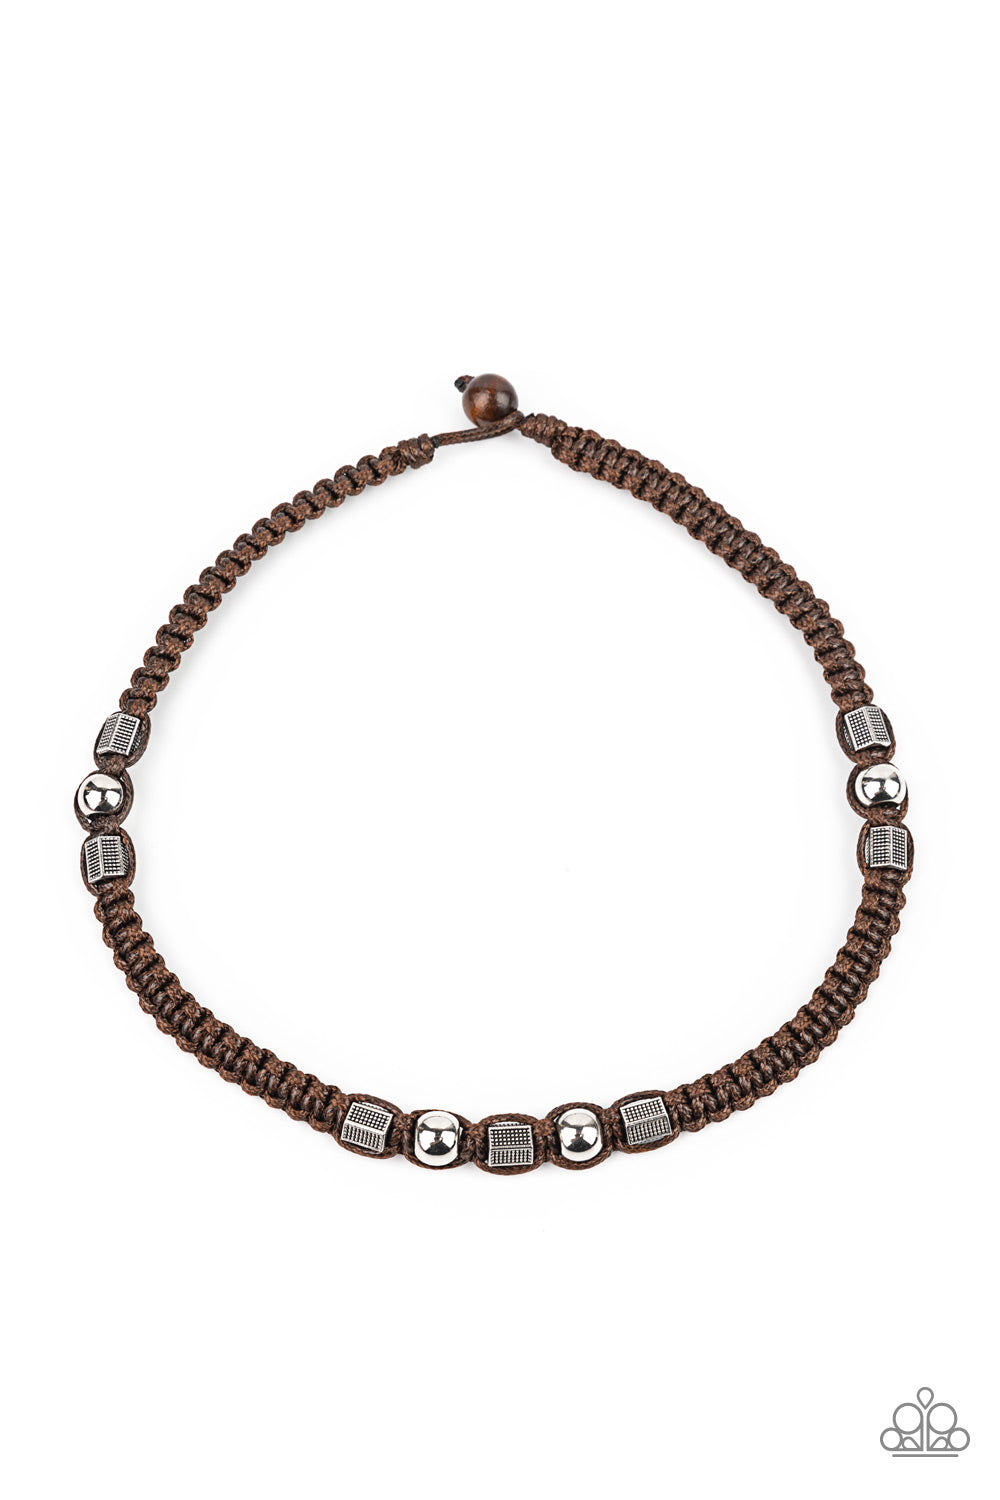 &lt;P&gt; Sections of shiny silver beads and studded hexagonal accents are knotted in place along a brown cord that has been braided around the neck for a seasonal look. Features a button loop closure. &lt;/p&gt;

&lt;P&gt;&lt;i&gt; Sold as one individual necklace.
&lt;/i&gt;&lt;/p&gt;

&lt;img src=\&quot;https://d9b54x484lq62.cloudfront.net/paparazzi/shopping/images/517_tag150x115_1.png\&quot; alt=\&quot;New Kit\&quot; align=\&quot;middle\&quot; height=\&quot;50\&quot; width=\&quot;50\&quot;/&gt;